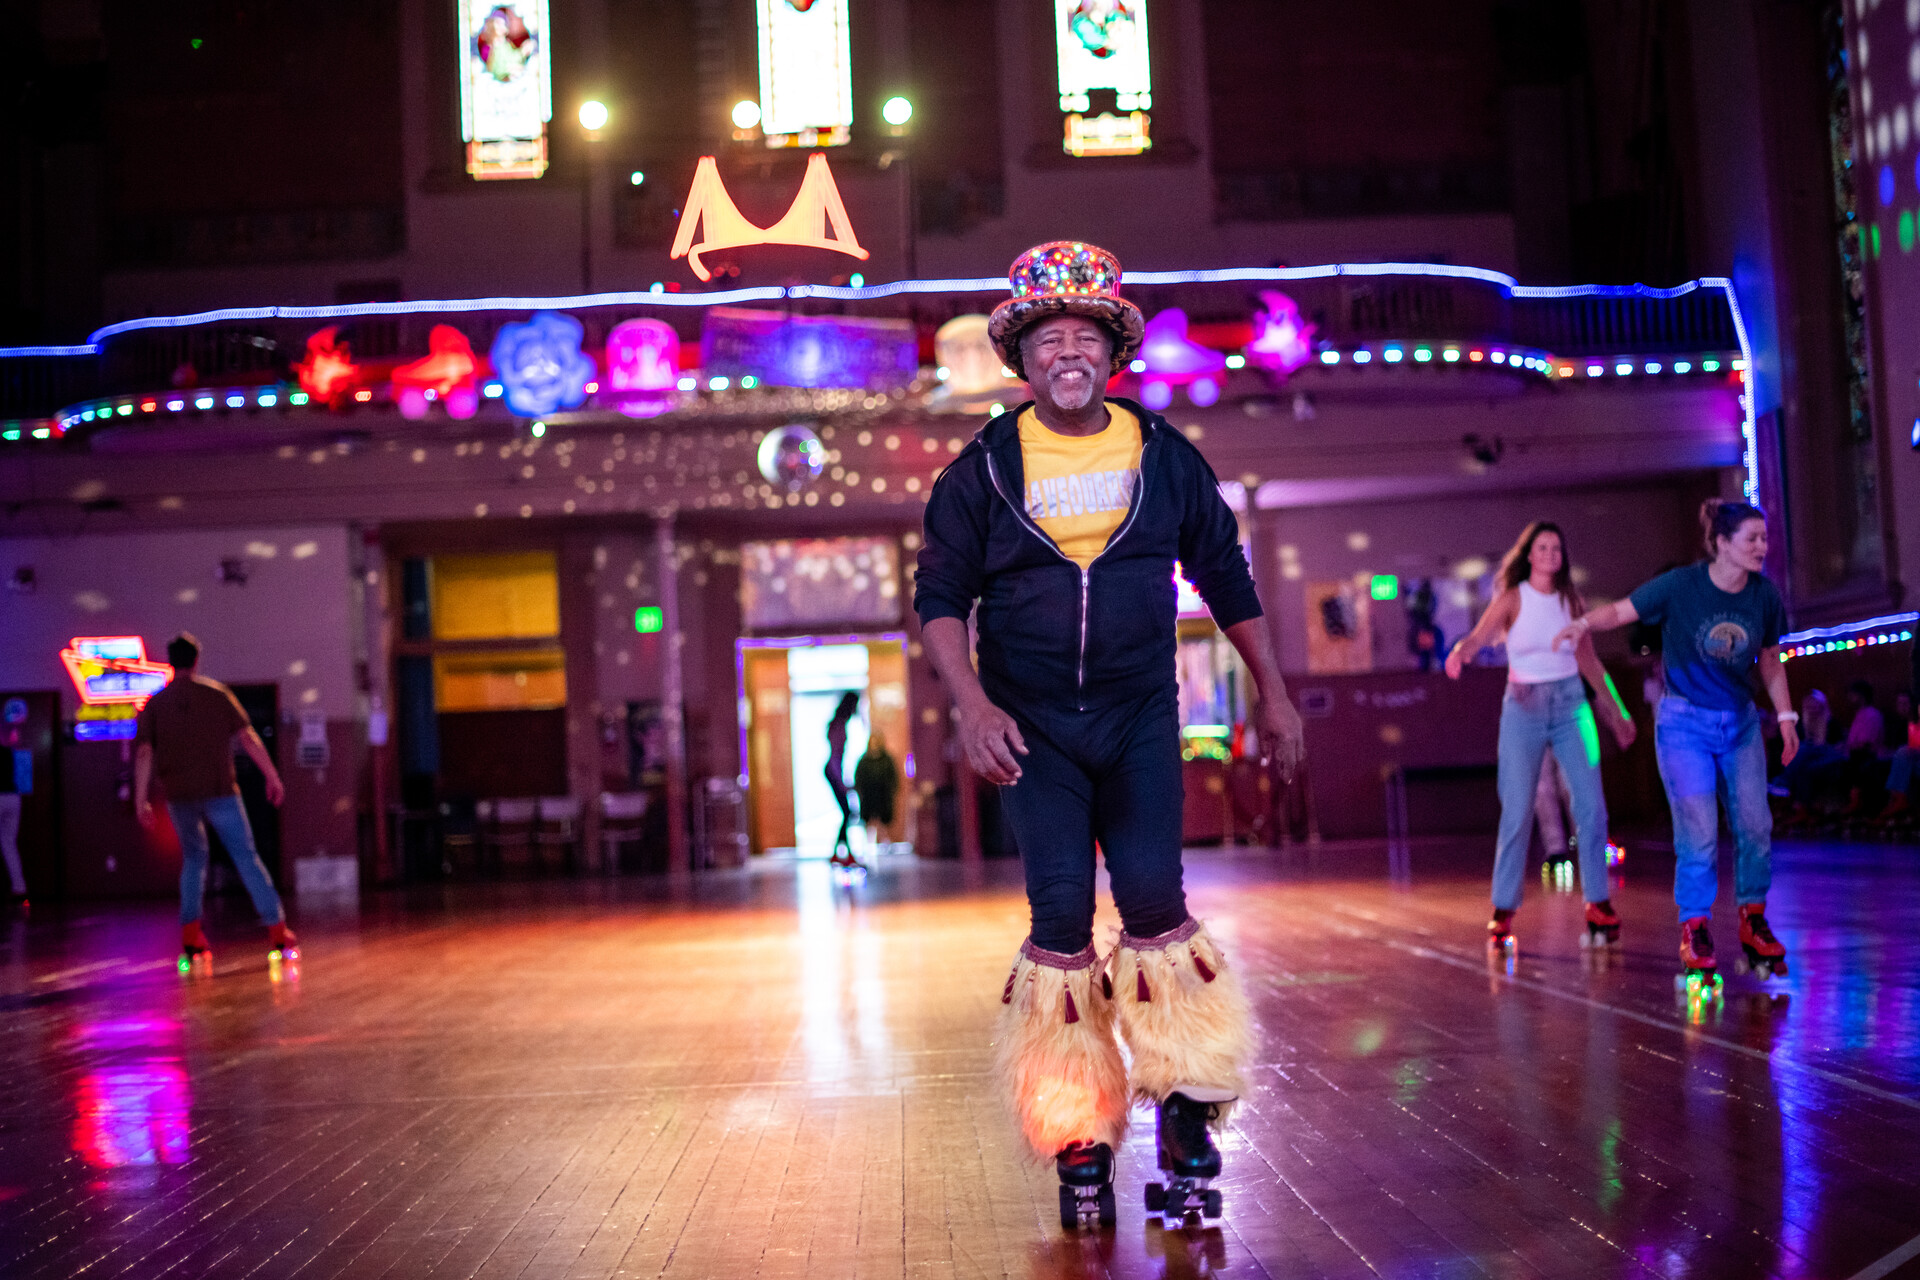 A roller skater smiles, skating in fur leg warmers and a top hat.